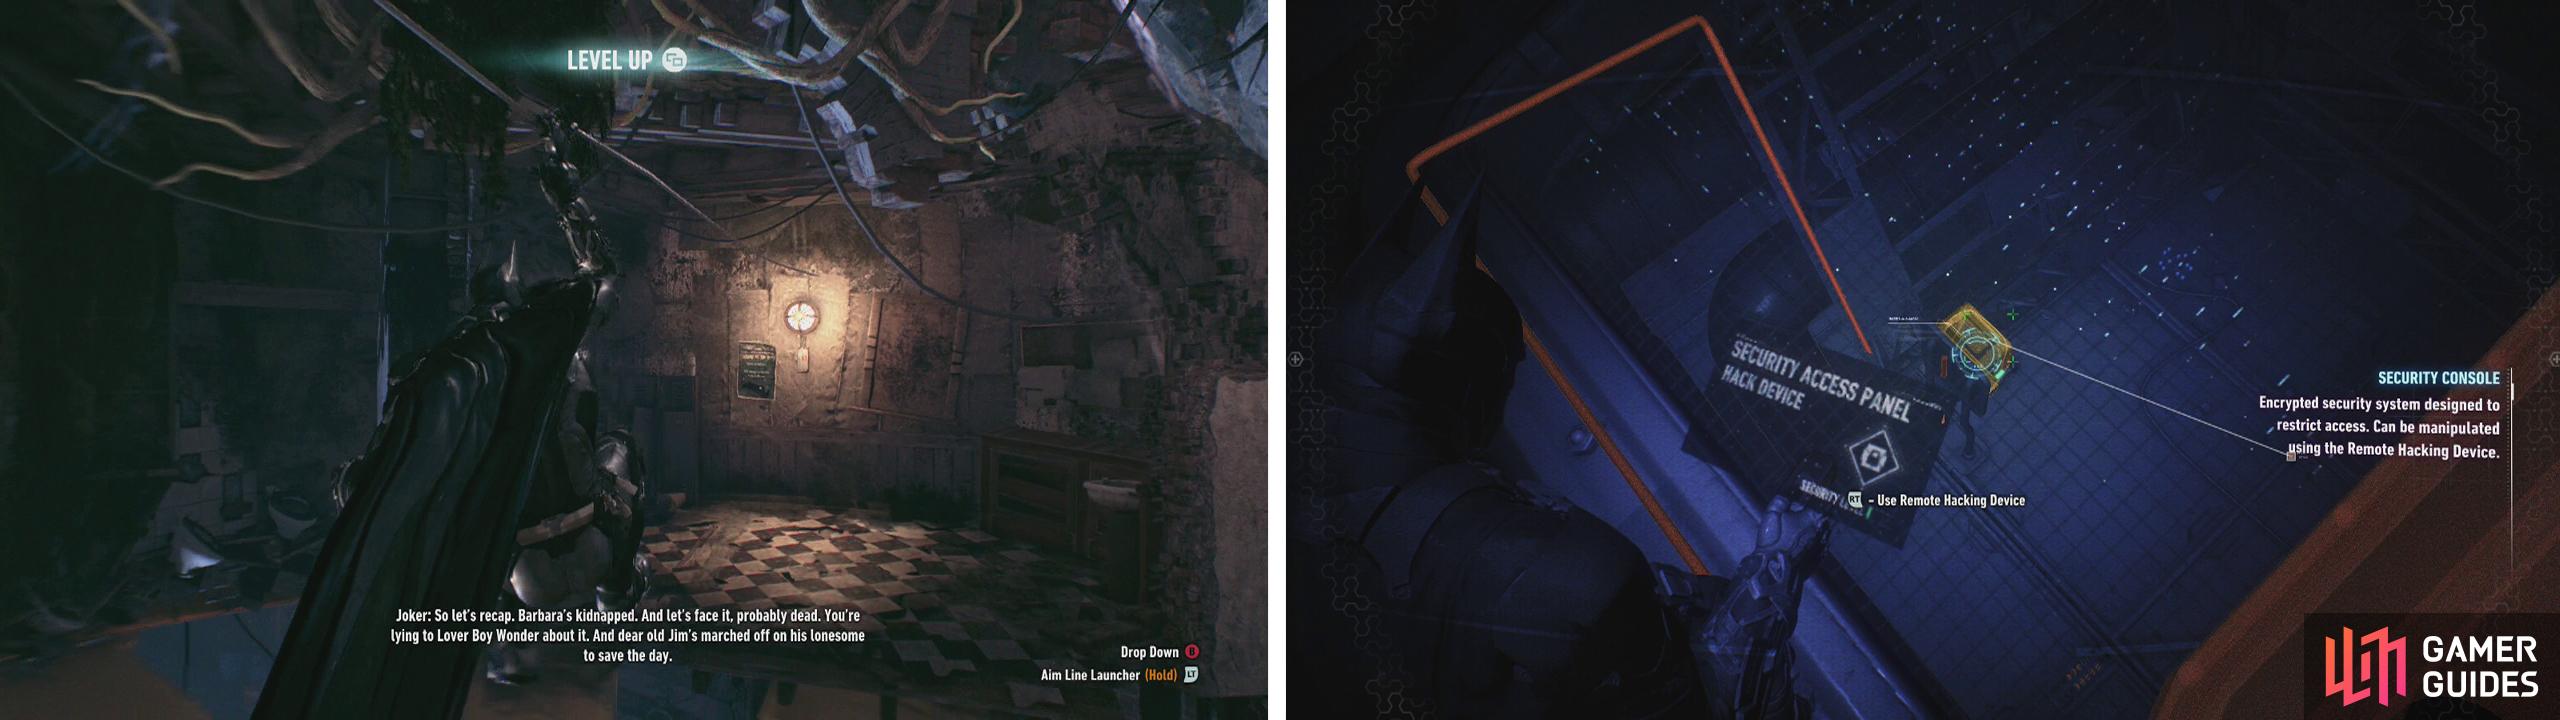 The Line Launcher can be used to cross gaps or hazardous floors (left). The Remote Hacking Device can open locked doors (right).